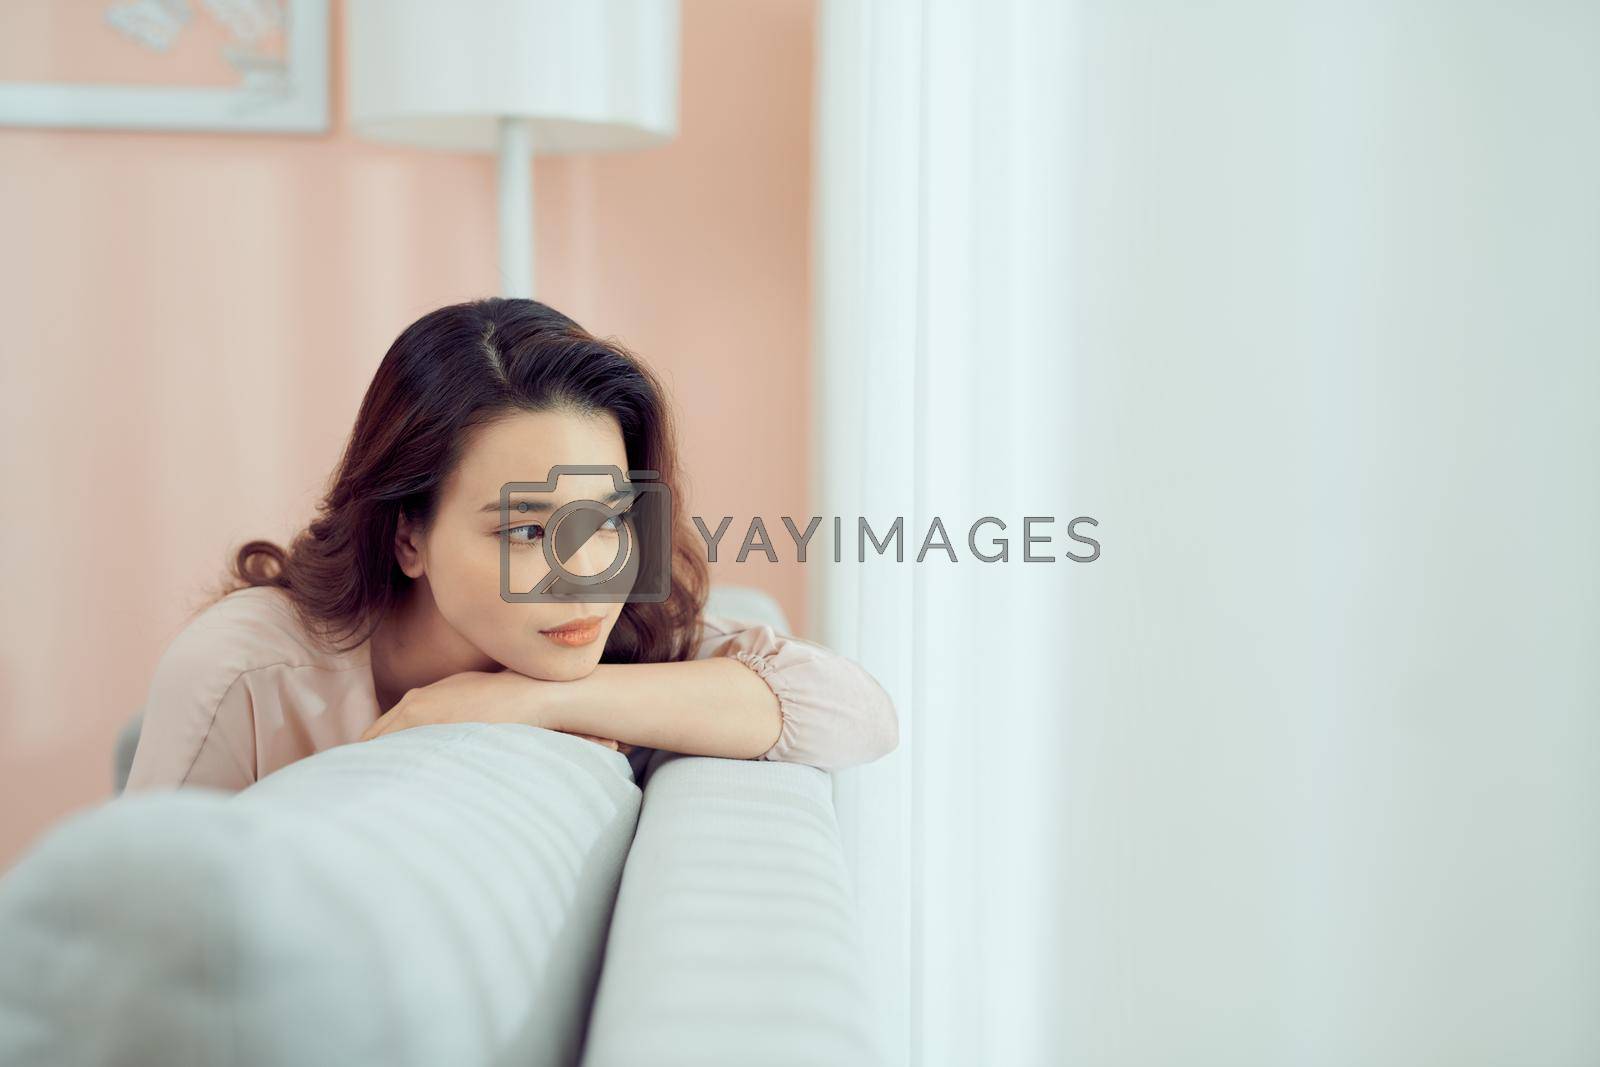 Royalty free image of Sad woman sitting on sofa at home deep in thoughts, thinking about important things by makidotvn